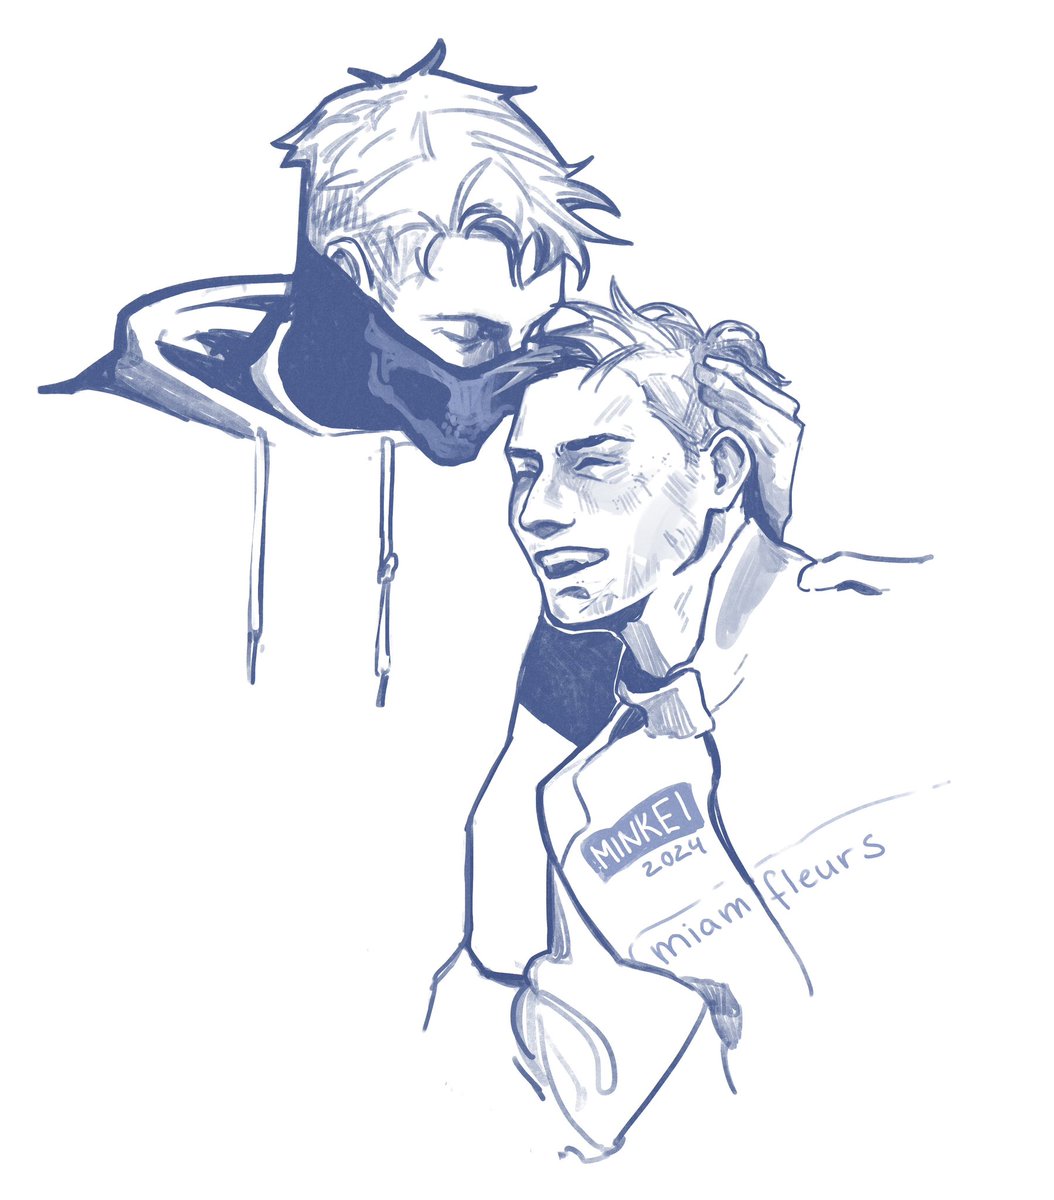 thinking abt ’the best of us can find happiness in misery‘ AGAIN
and you guys should too

#soapghost #ghostsoap #SimonGhostRiley #JohnSoapMacTavish #CallofDuty #Ghoap